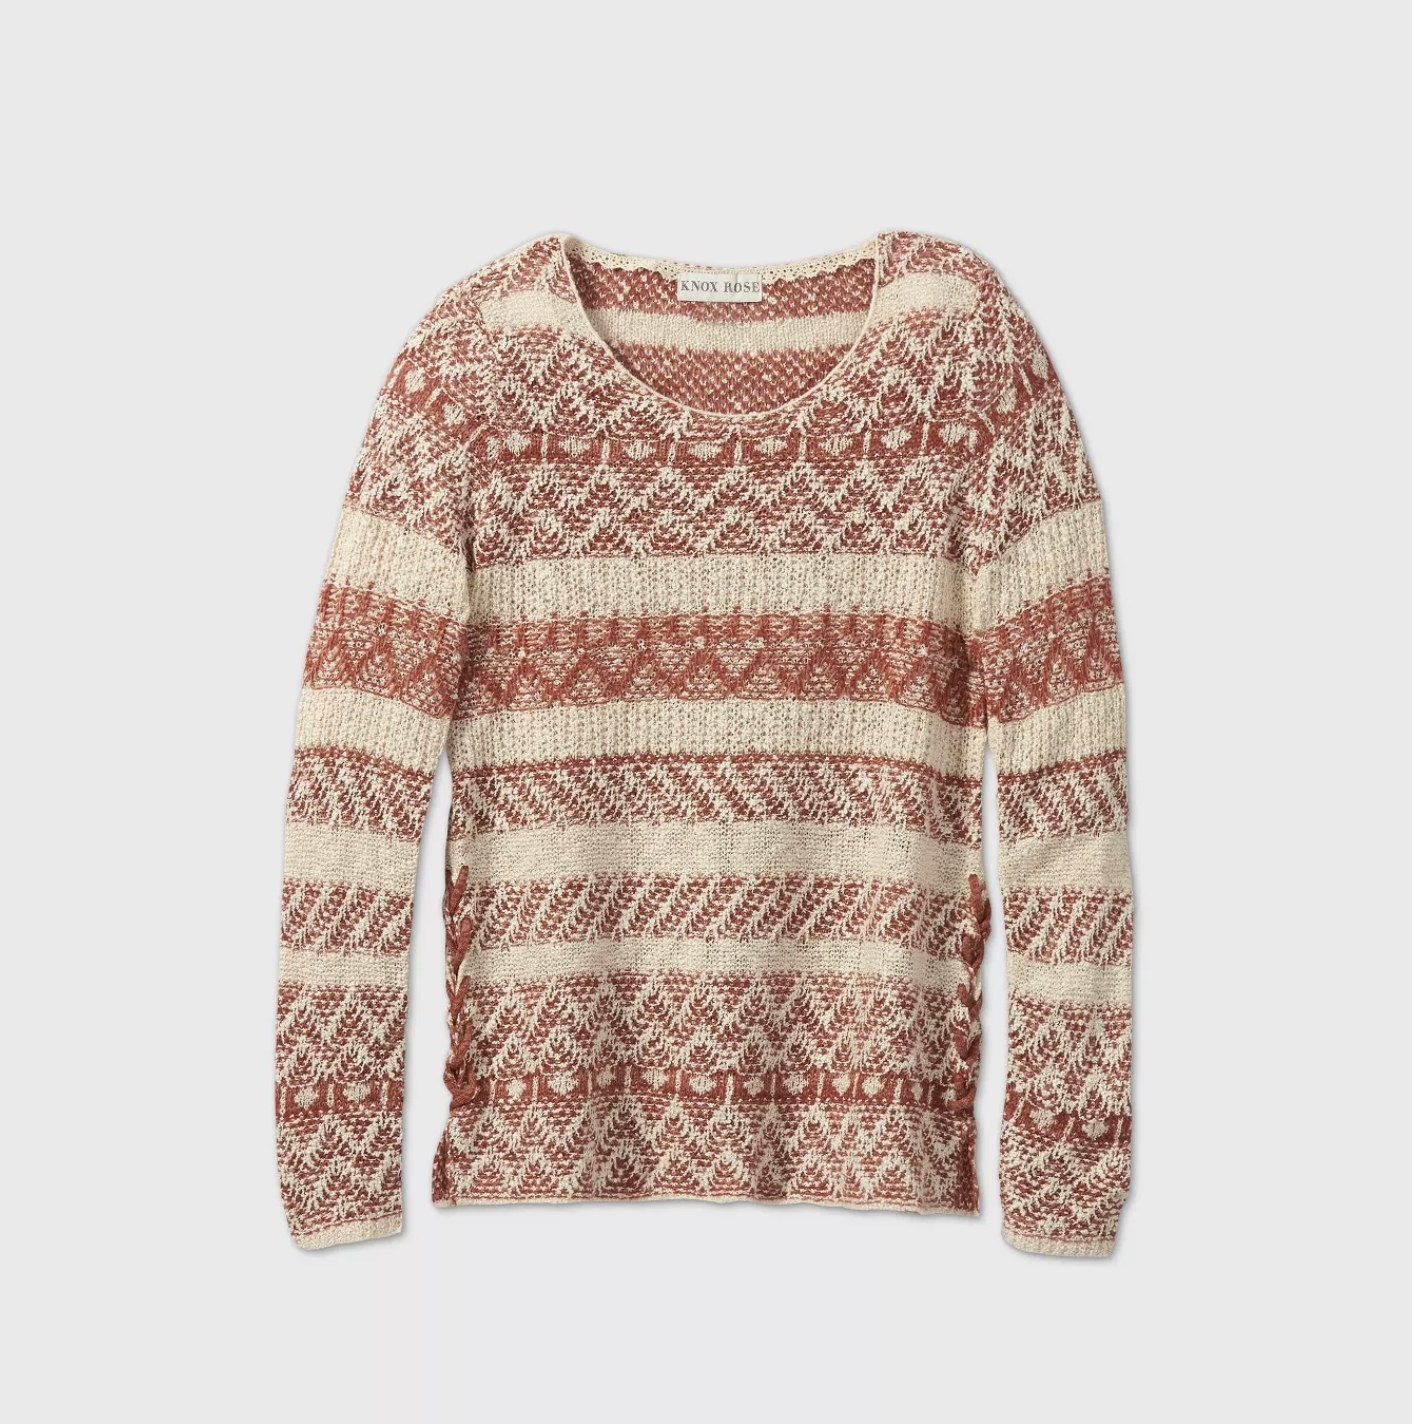 A red and cream striped  pullover crewneck sweater